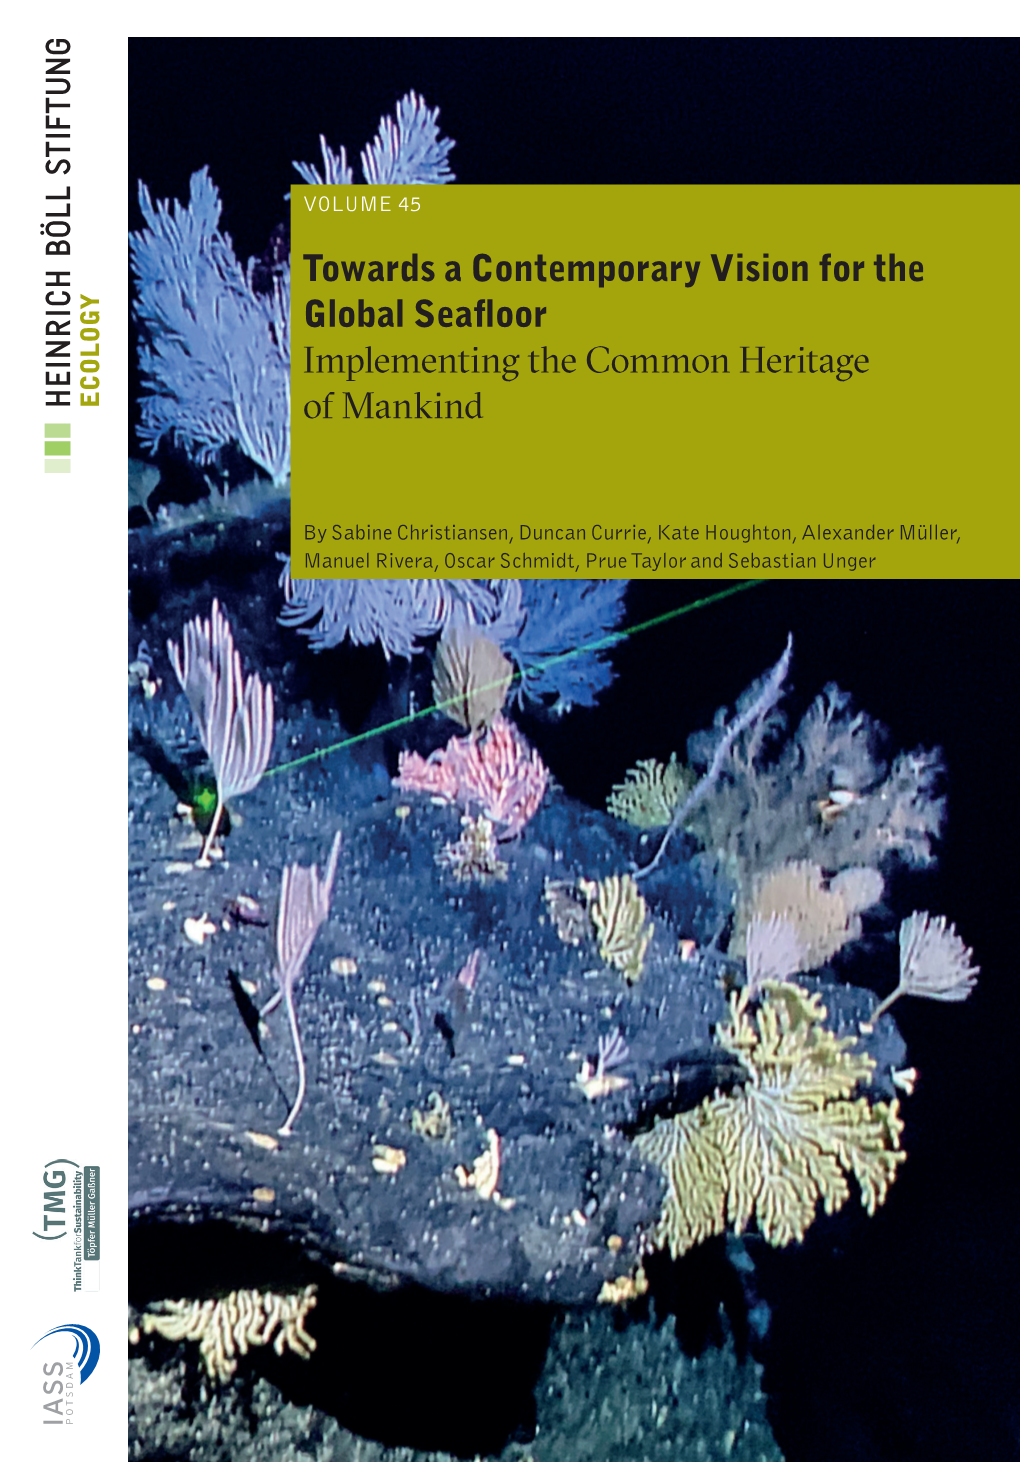 Towards a Contemporary Vision for the Global Seafloor Implementing the Common Heritage of Mankind